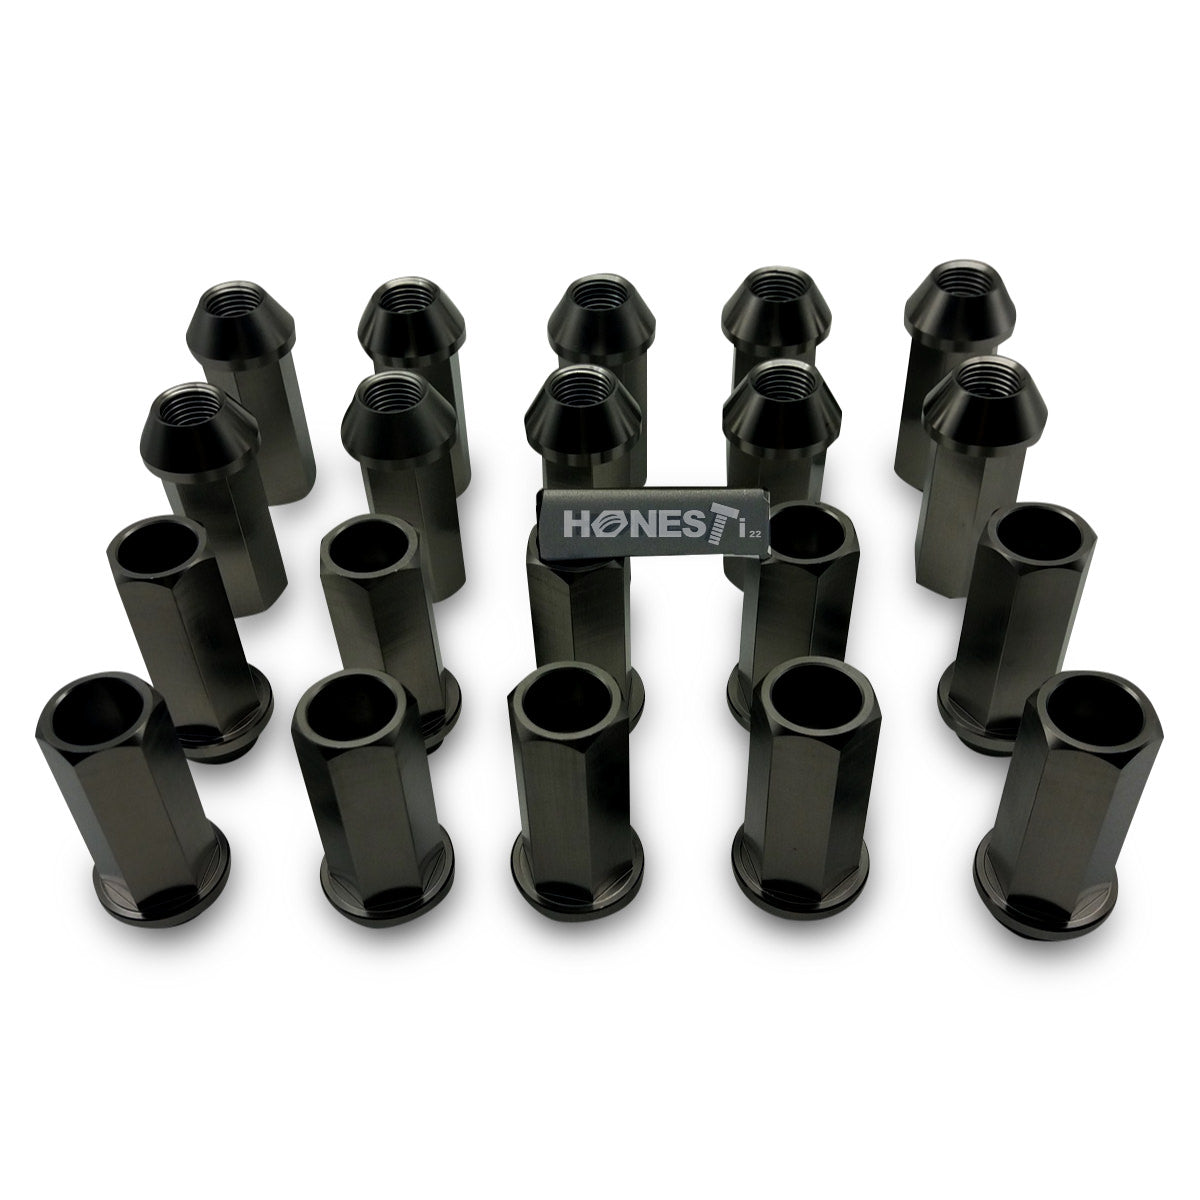 GRADE 5 Titanium Lug Nuts, M12x1.5x45mm, Cone Seat, Open End for TOYOTA, HONDA, FORD